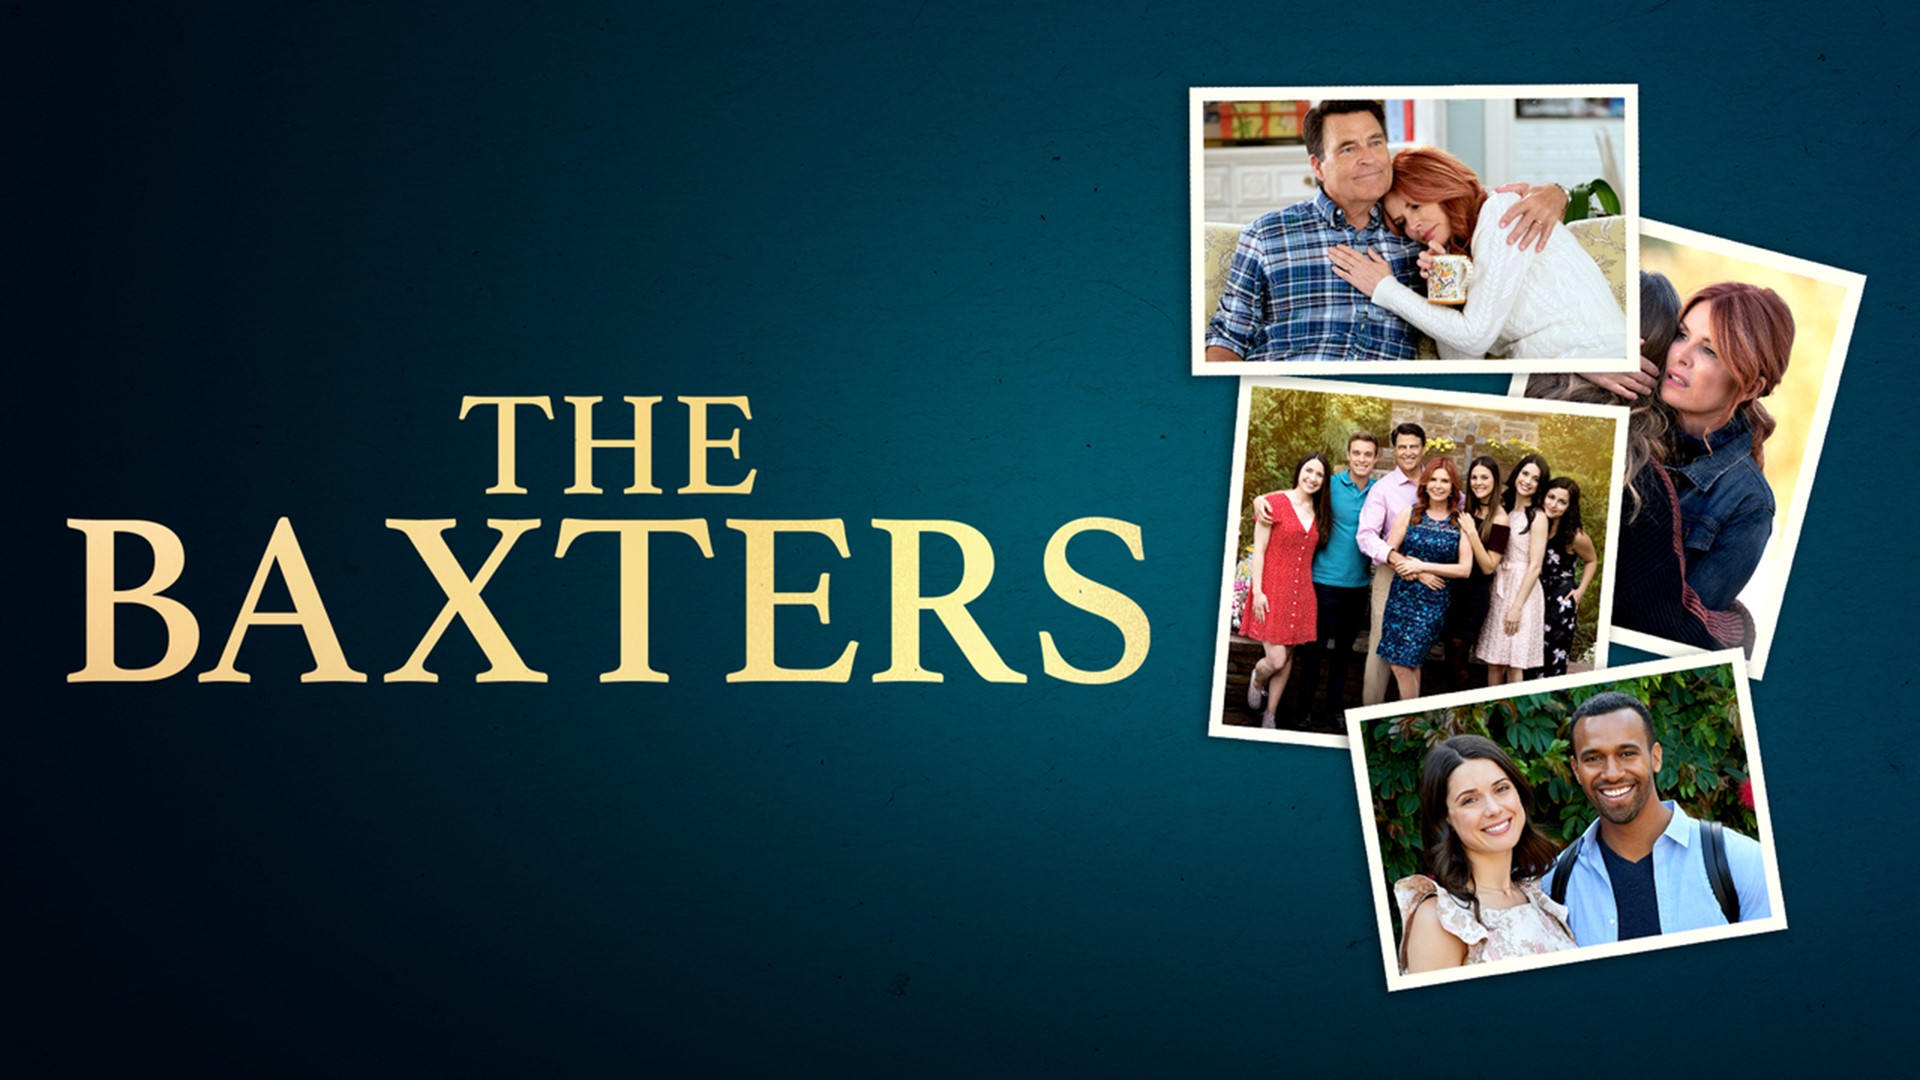 The Baxters on Prime Video is a new faith based series that centers around family issues and how to overcome them. We spoke with star and exec. producer, Roma Downey